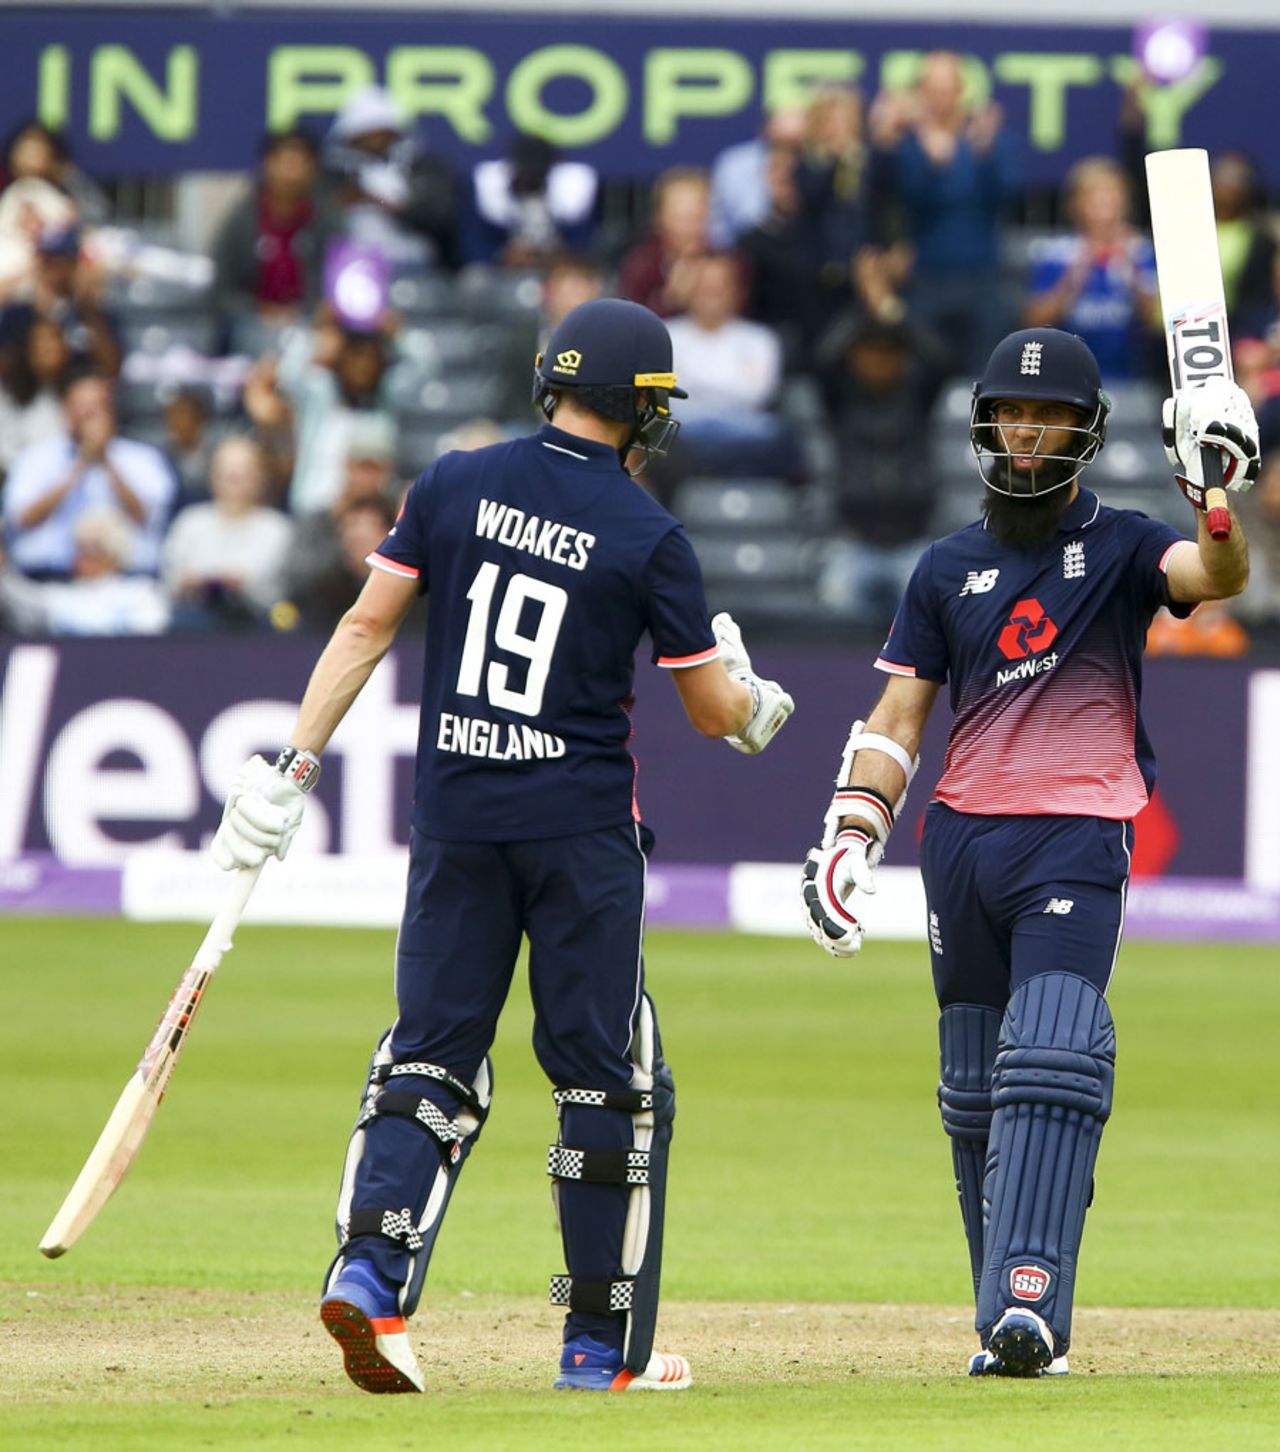 Chris Woakes and Moeen Ali put on a century stand, England v West Indies, 3rd ODI, Bristol, September 24, 2017